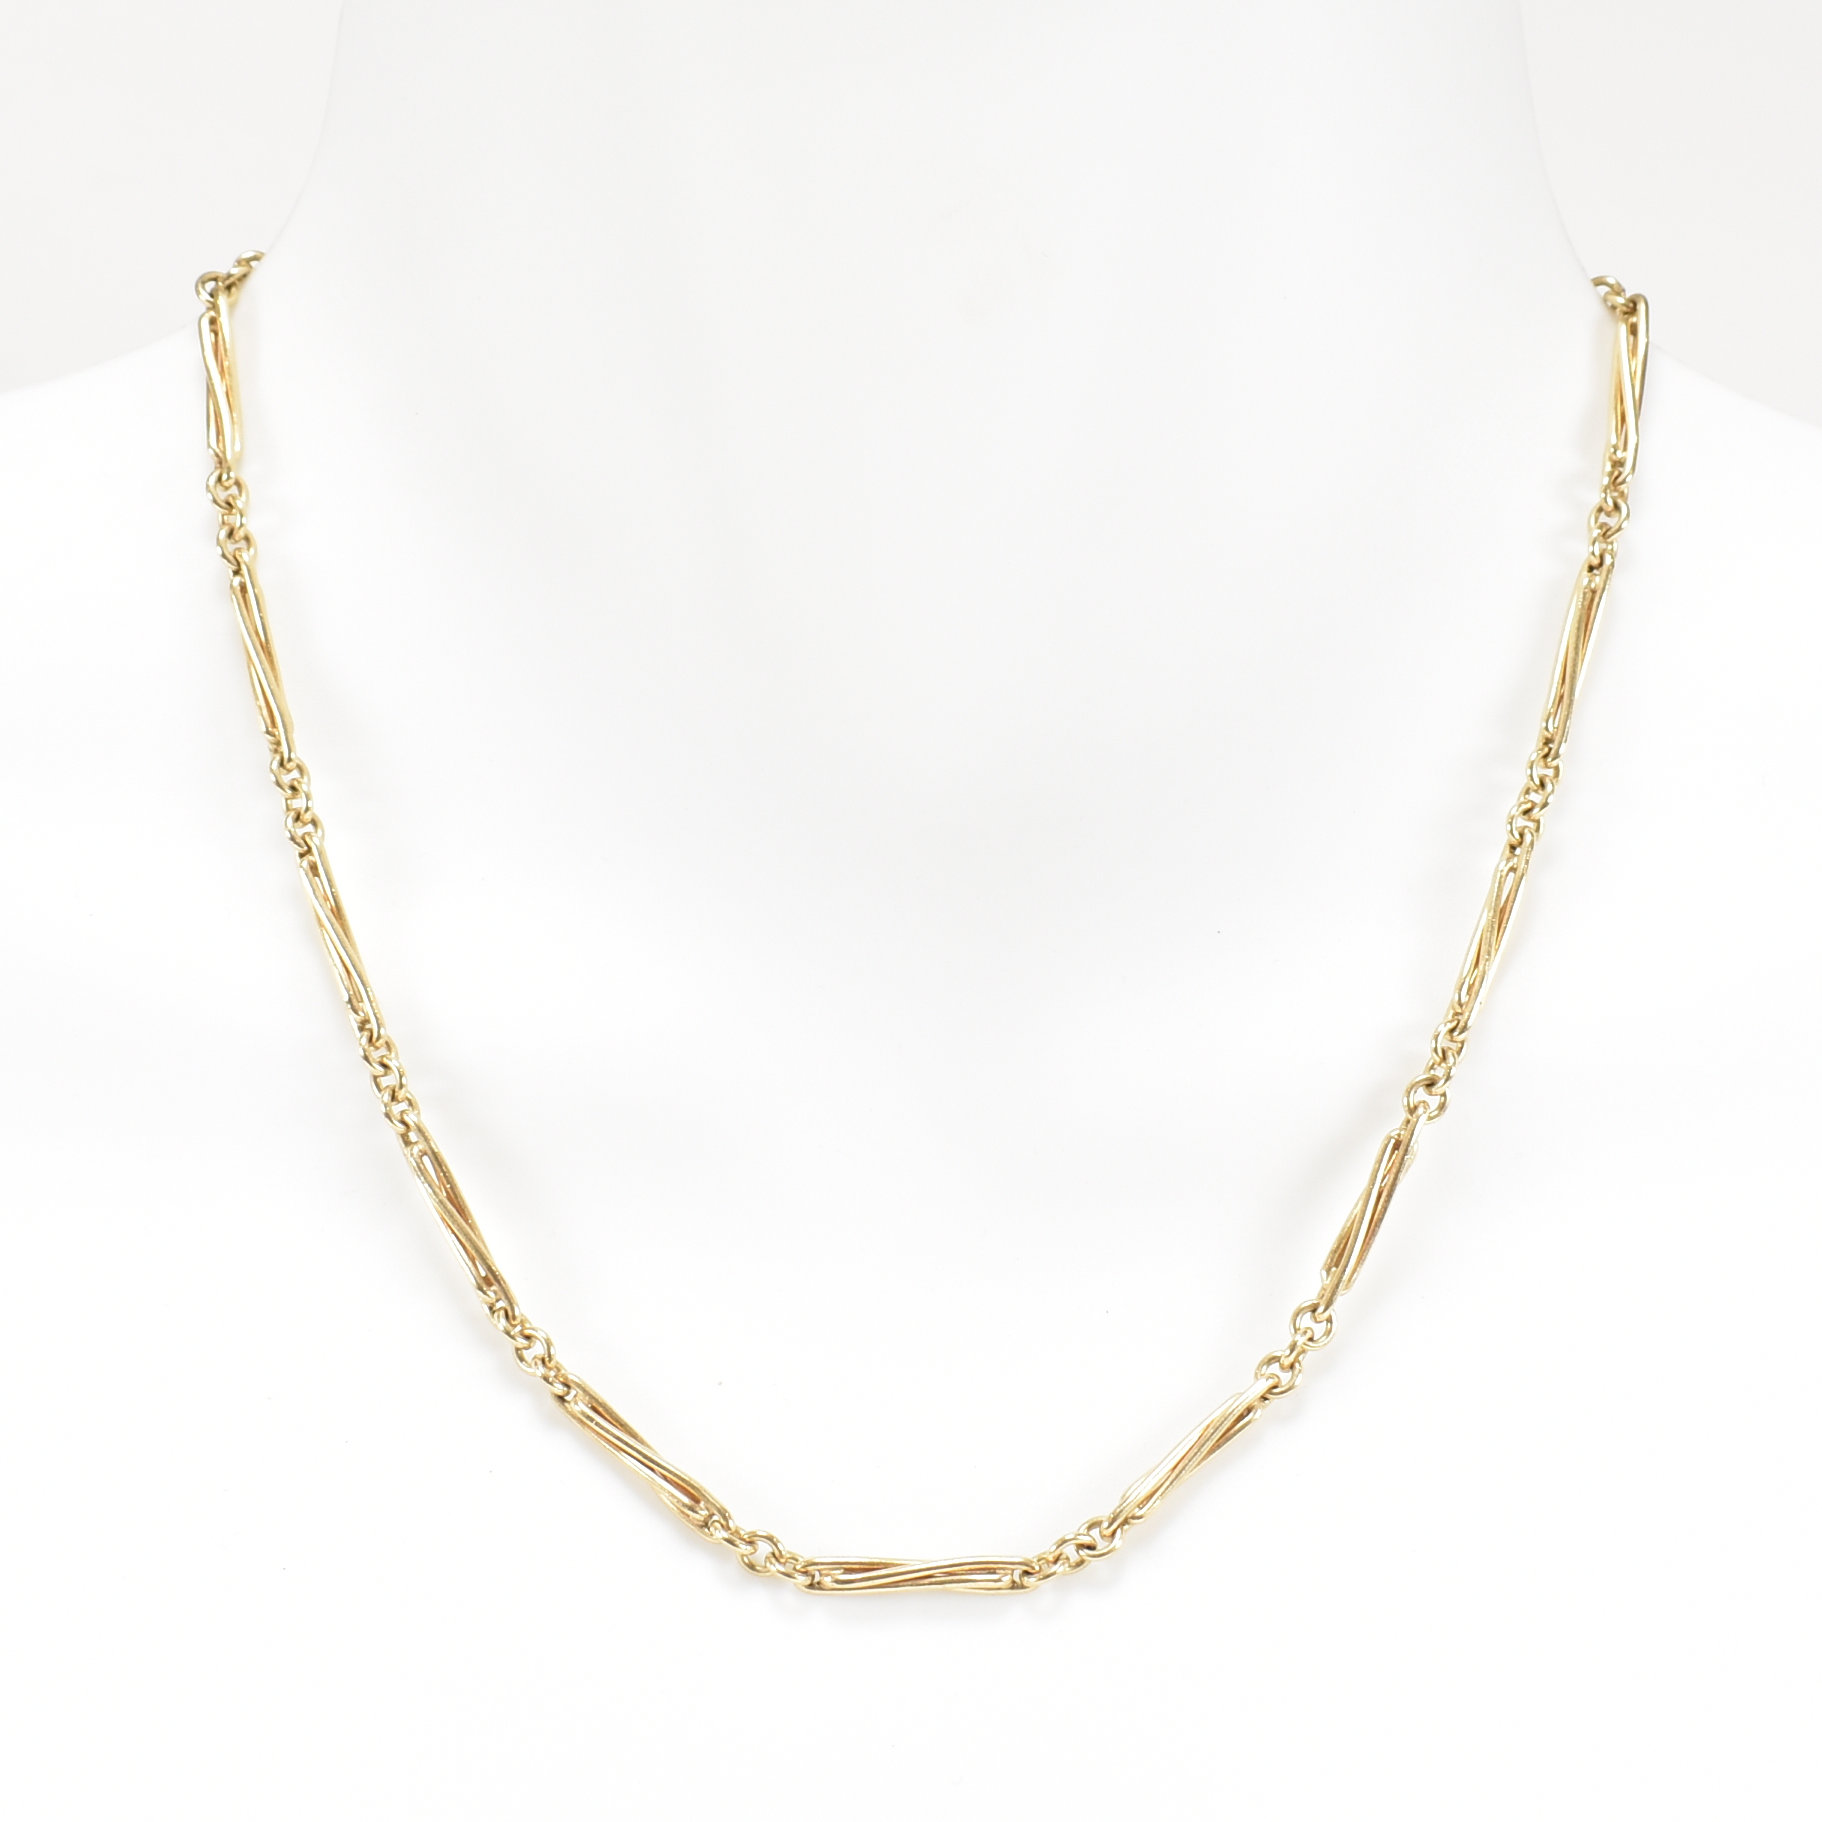 9CT GOLD TROMBONE & LOVERS KNOT NECKLACE CHAIN - Image 2 of 5